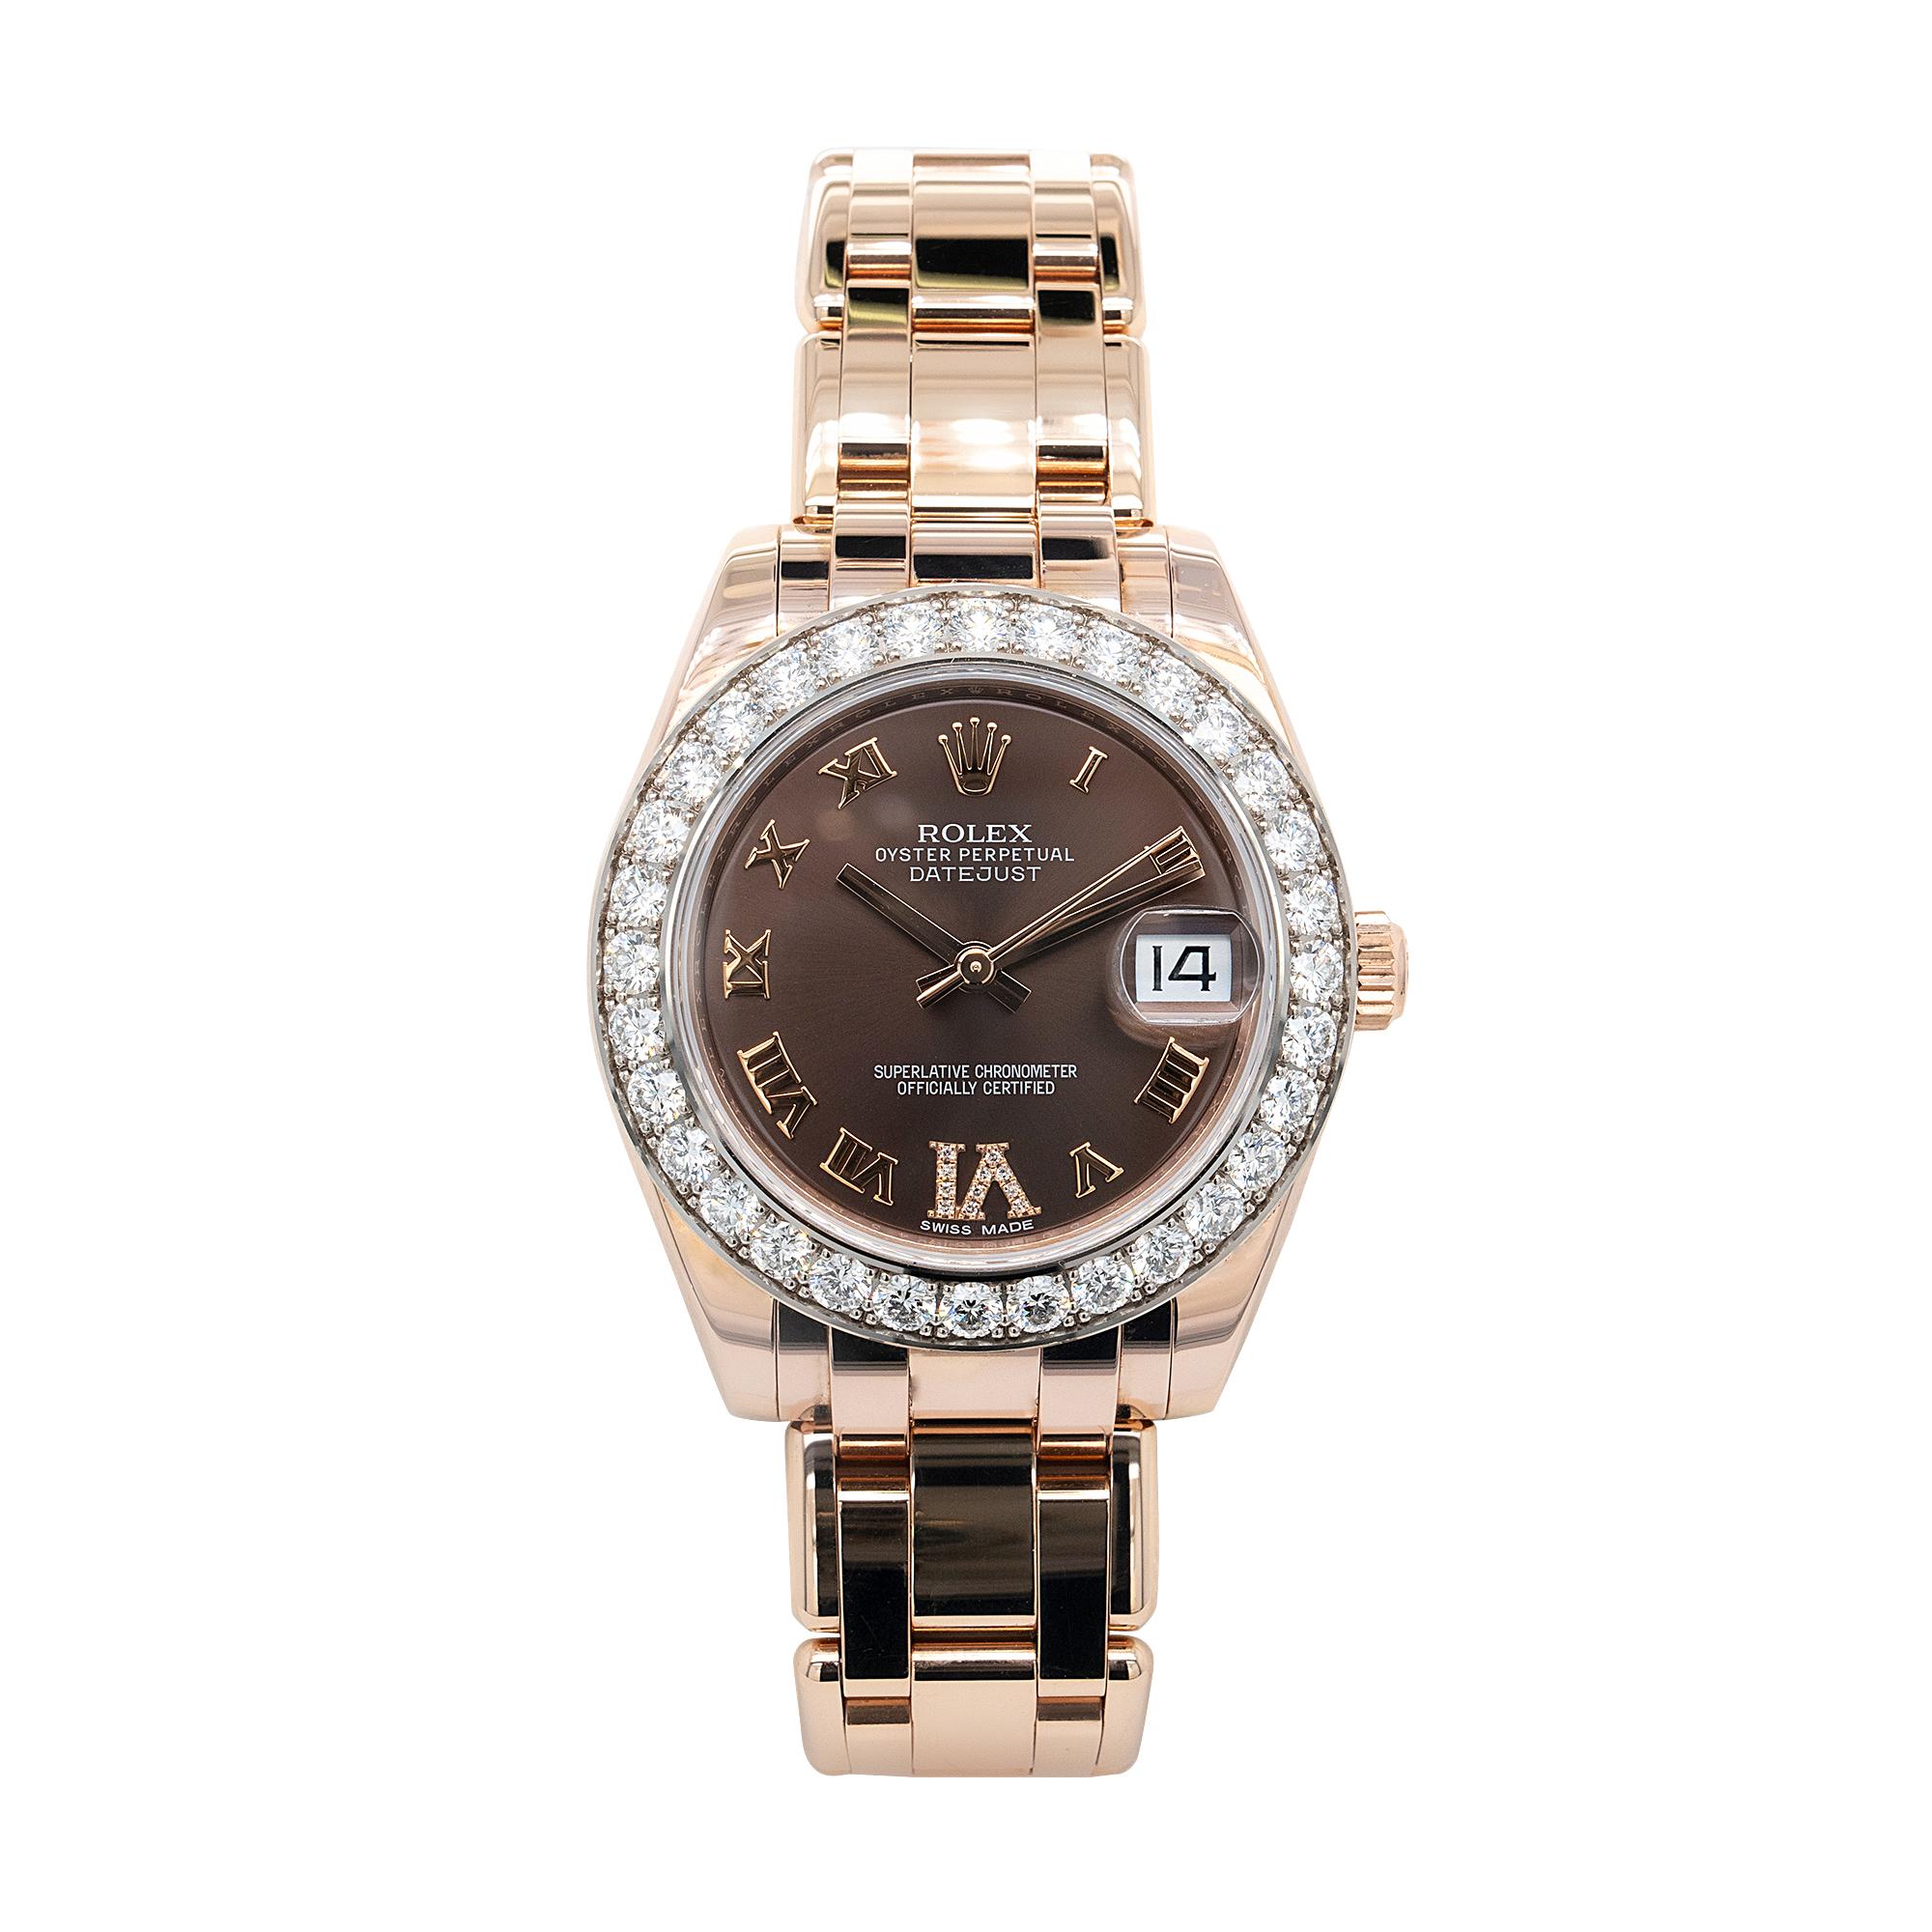 Brand: Rolex
Model Name: Rolex Pearlmaster Rose Gold Diamond Ladies Watch
Model Number: 81285
Case Material: 18k Rose Gold
Case Diameter: Oyster Case 34.0mm
Crystal: Scratch Resistant Sapphire Crystal with Cyclops Magnifier
Bezel: Factory